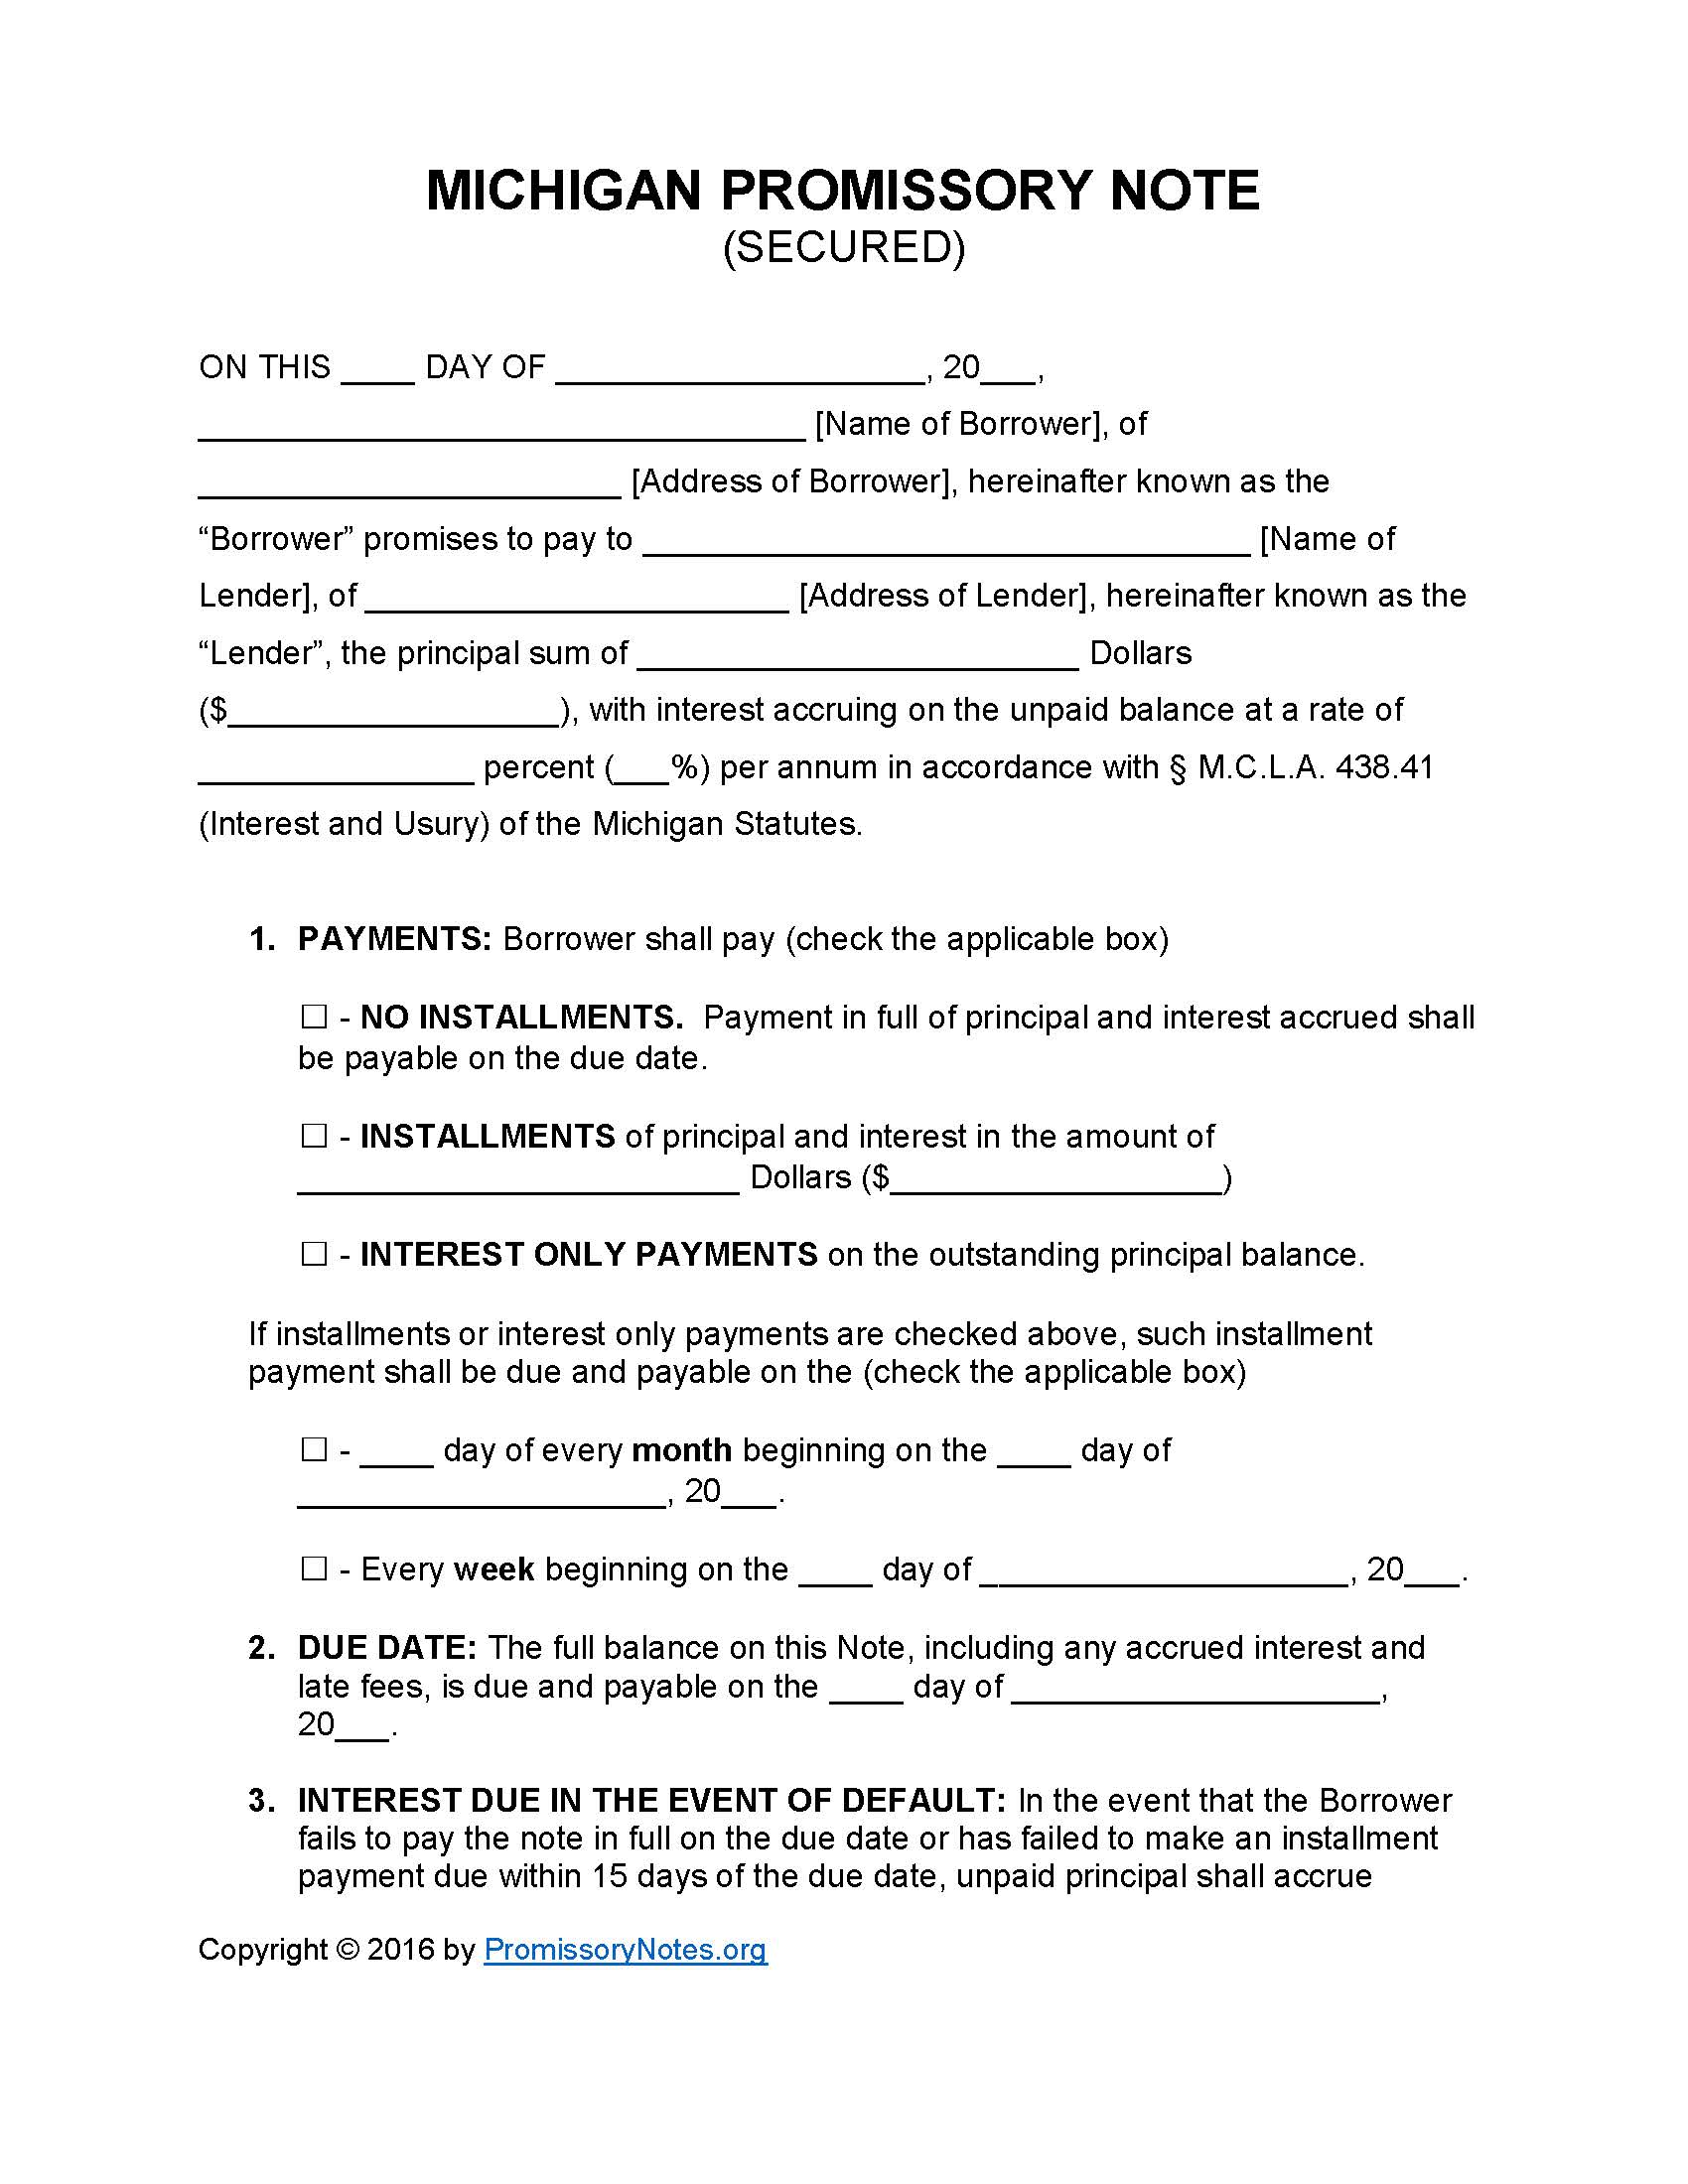 michigan-secured-promissory-note-form